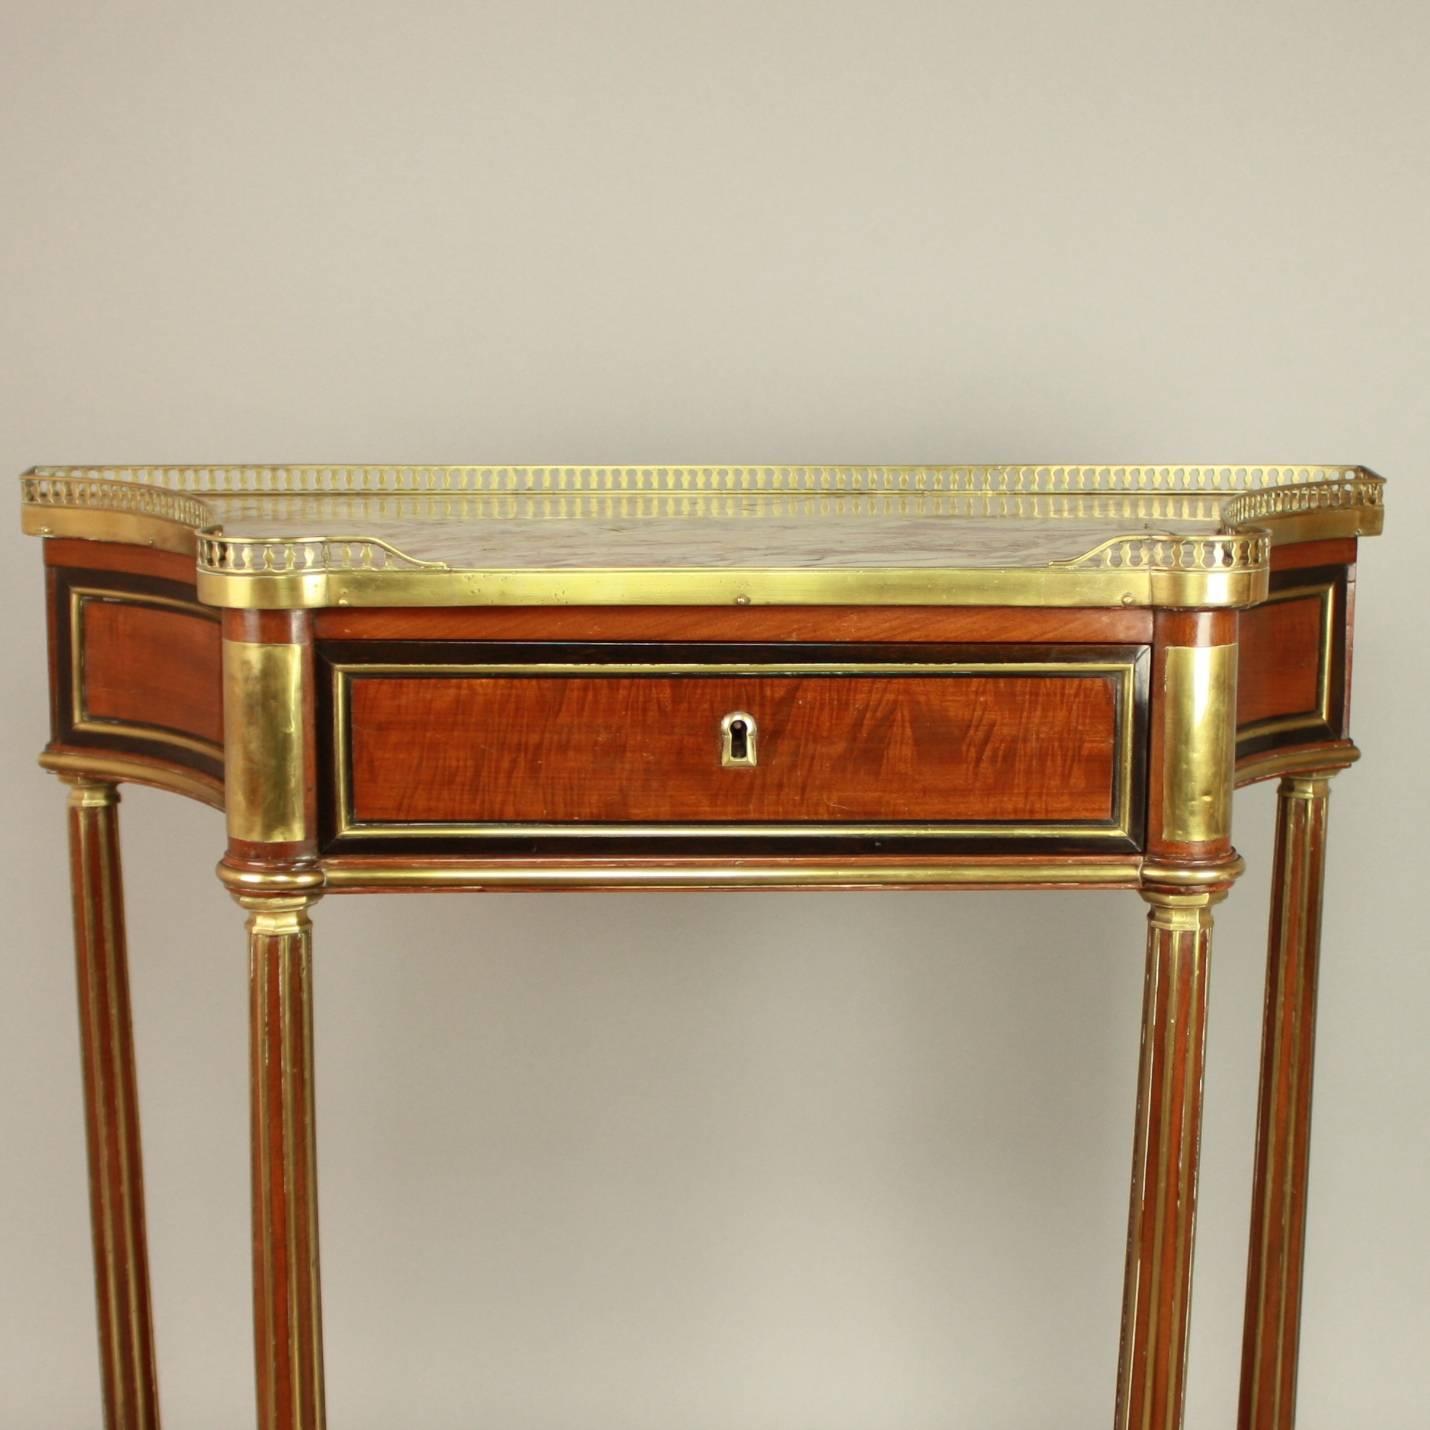 18th Century Louis XVI Gilt Bronze-Mounted Satinwood and Mahogany Console Table